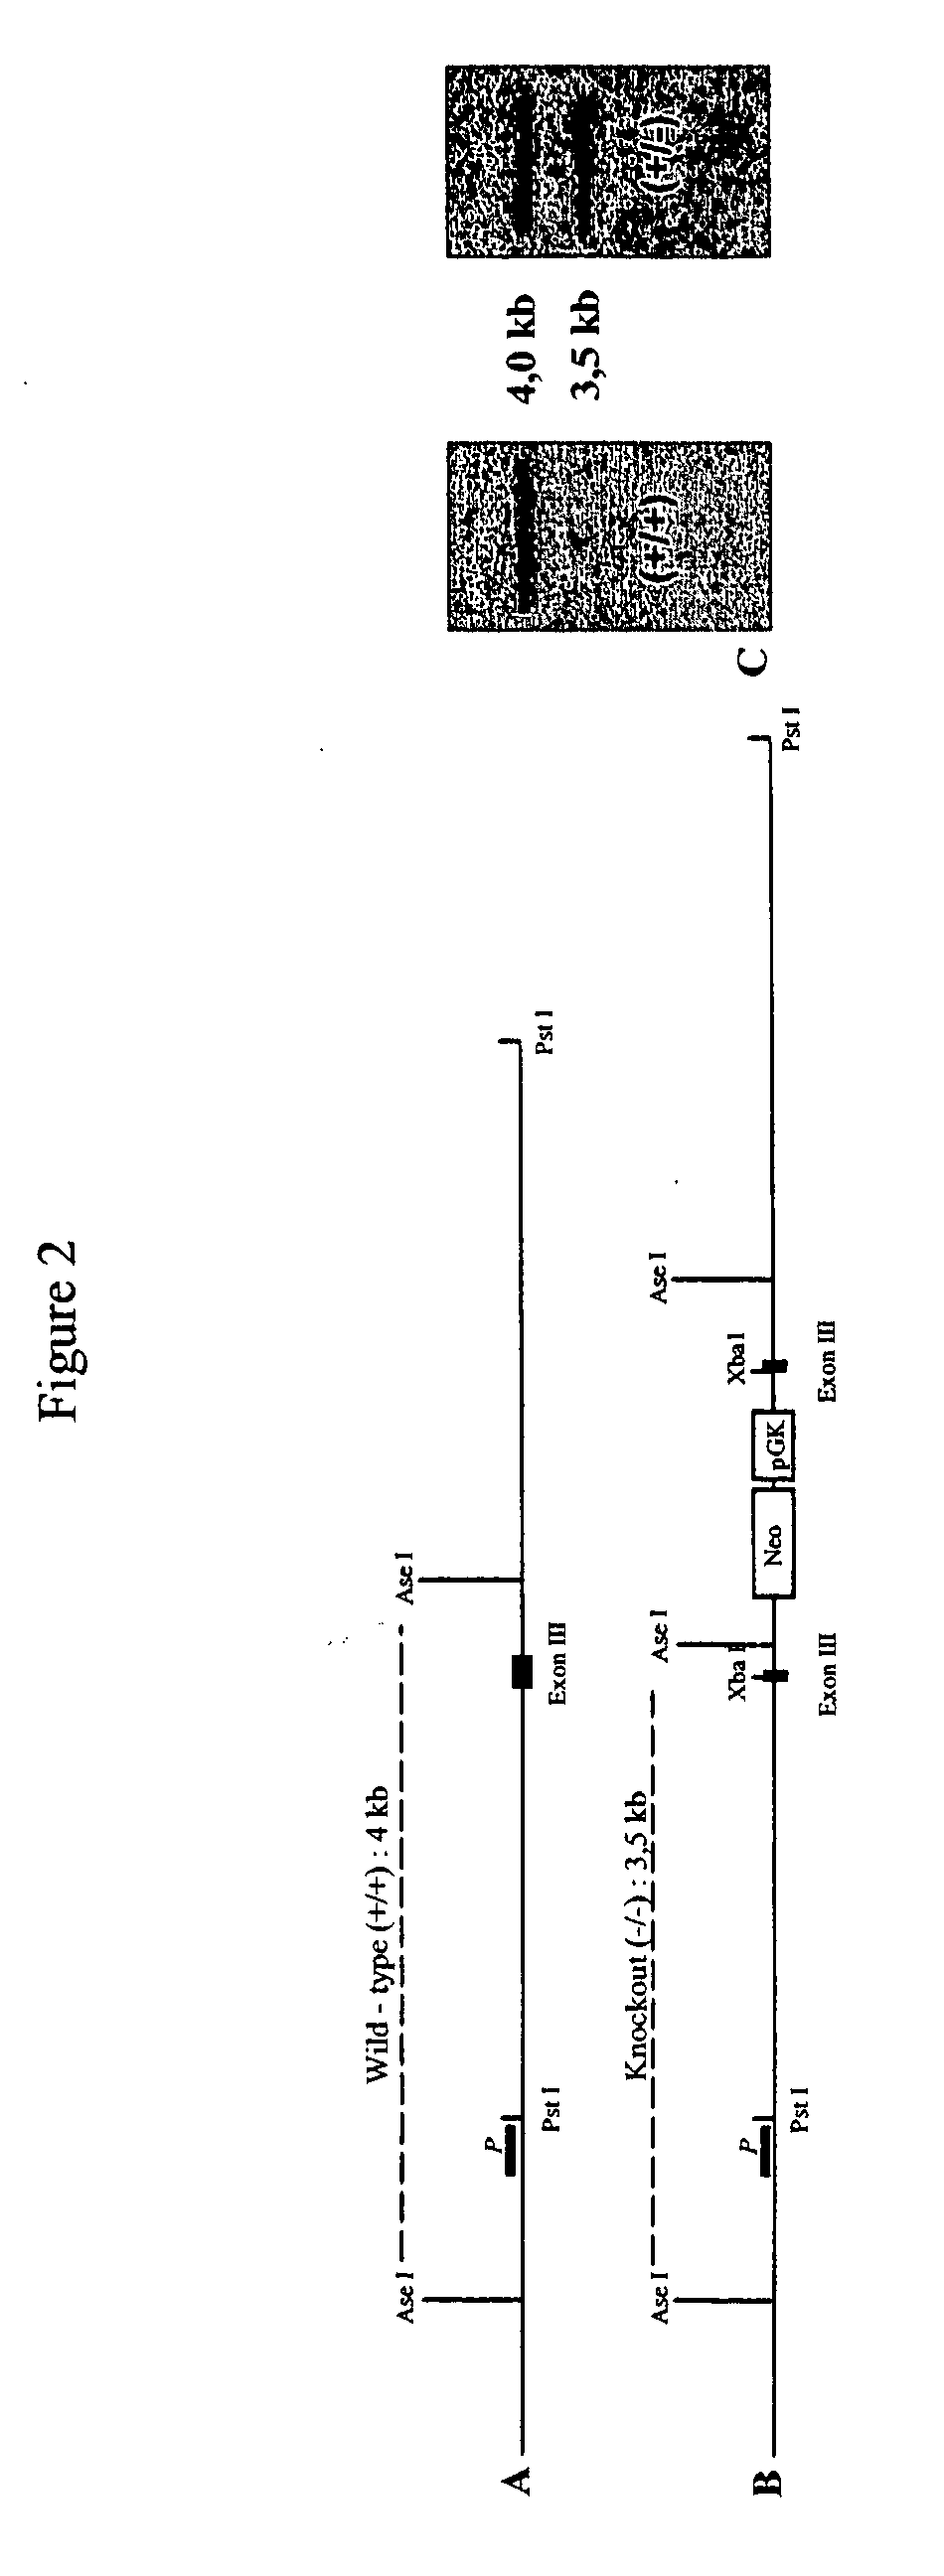 Pharmaceutical composition for treating and/or preventing a pathology associated with an obsessional behavior or with obesity